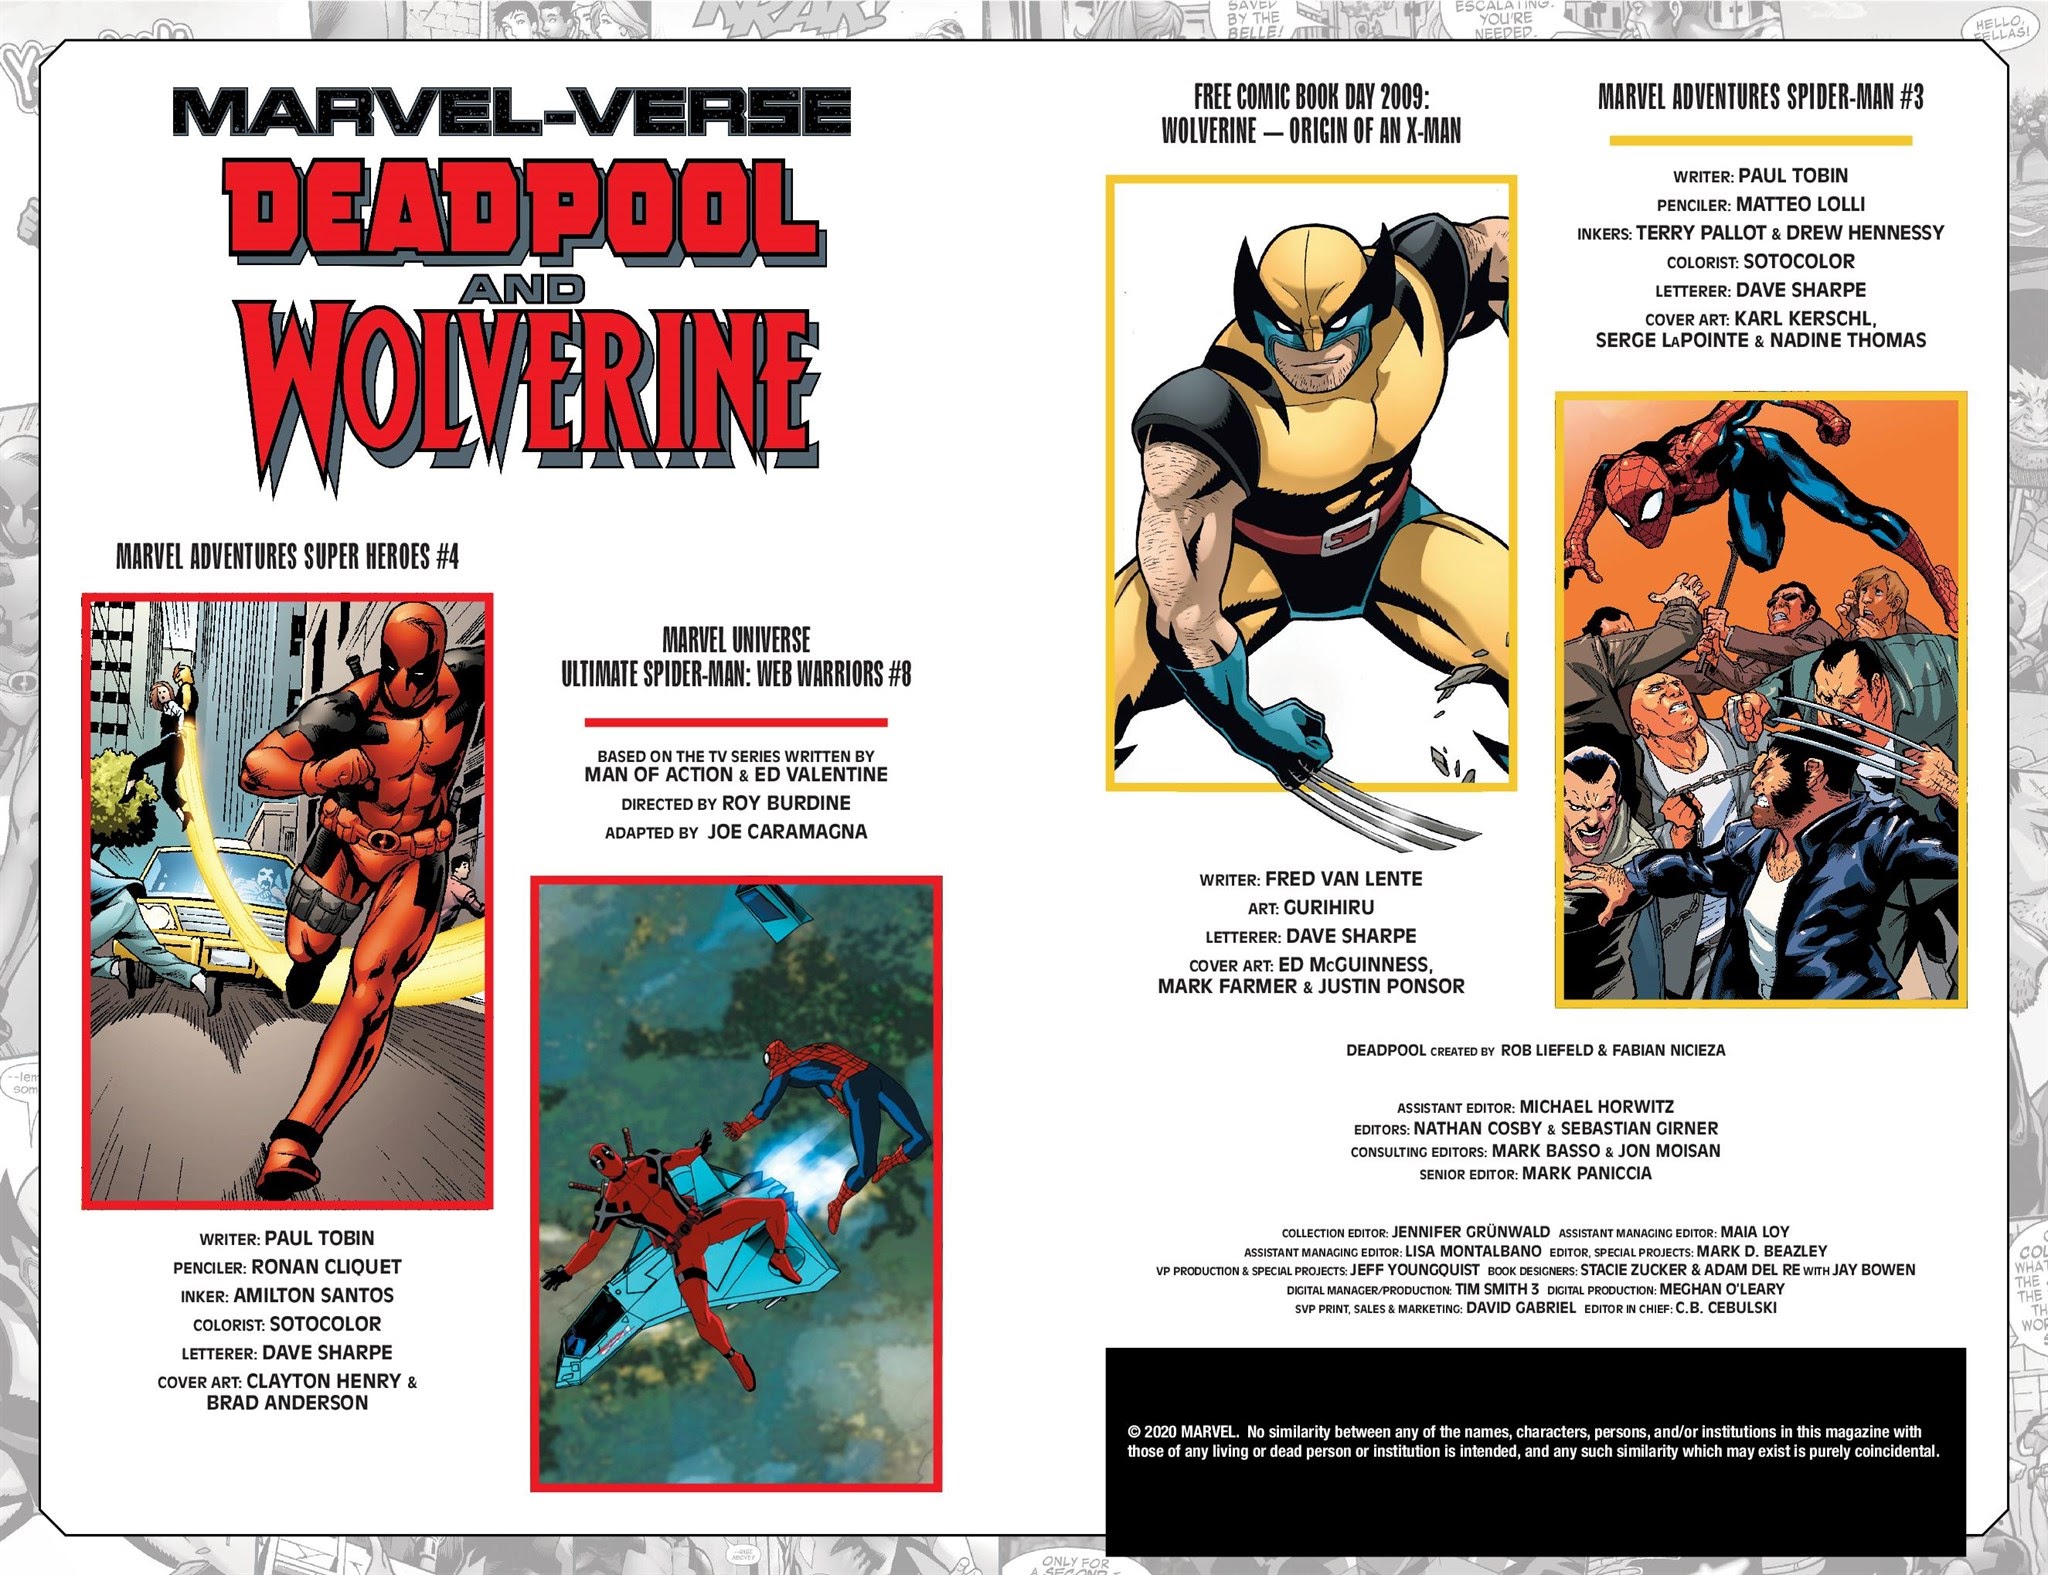 Read online Marvel-Verse (2020) comic -  Issue # Deadpool and Wolverine - 3